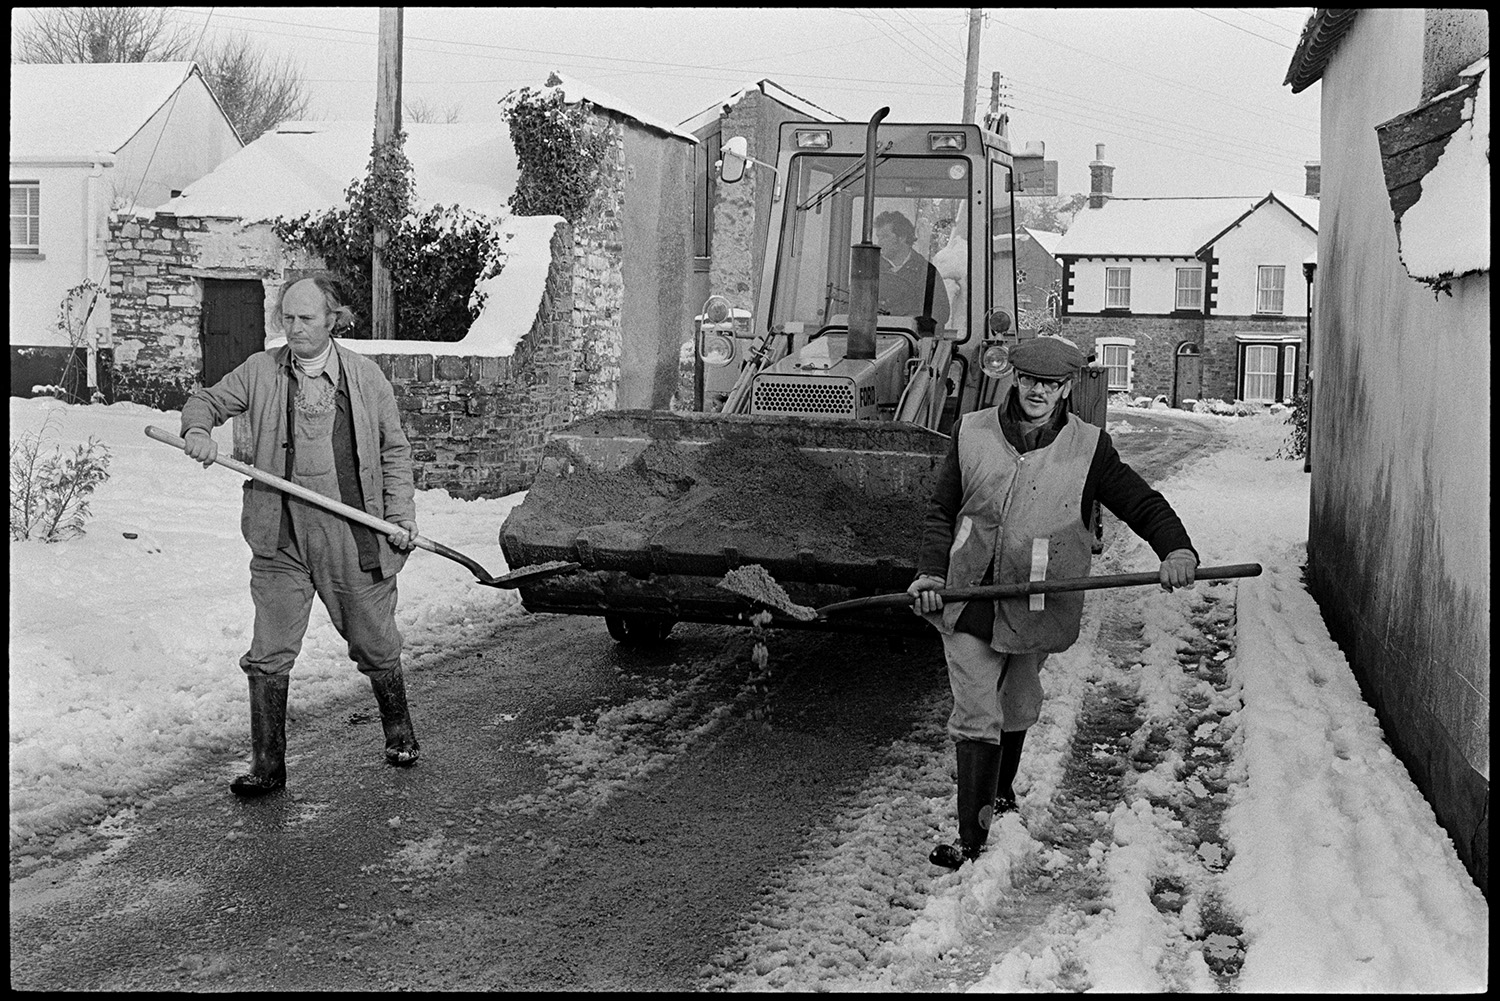 Snow, Street scenes with men spreading grit on road, woman telephoning from kiosk. 
[Men spreading grit on a snowy road in Dolton, using shovels. A tractor is following them with a load of grit in its bucket.]